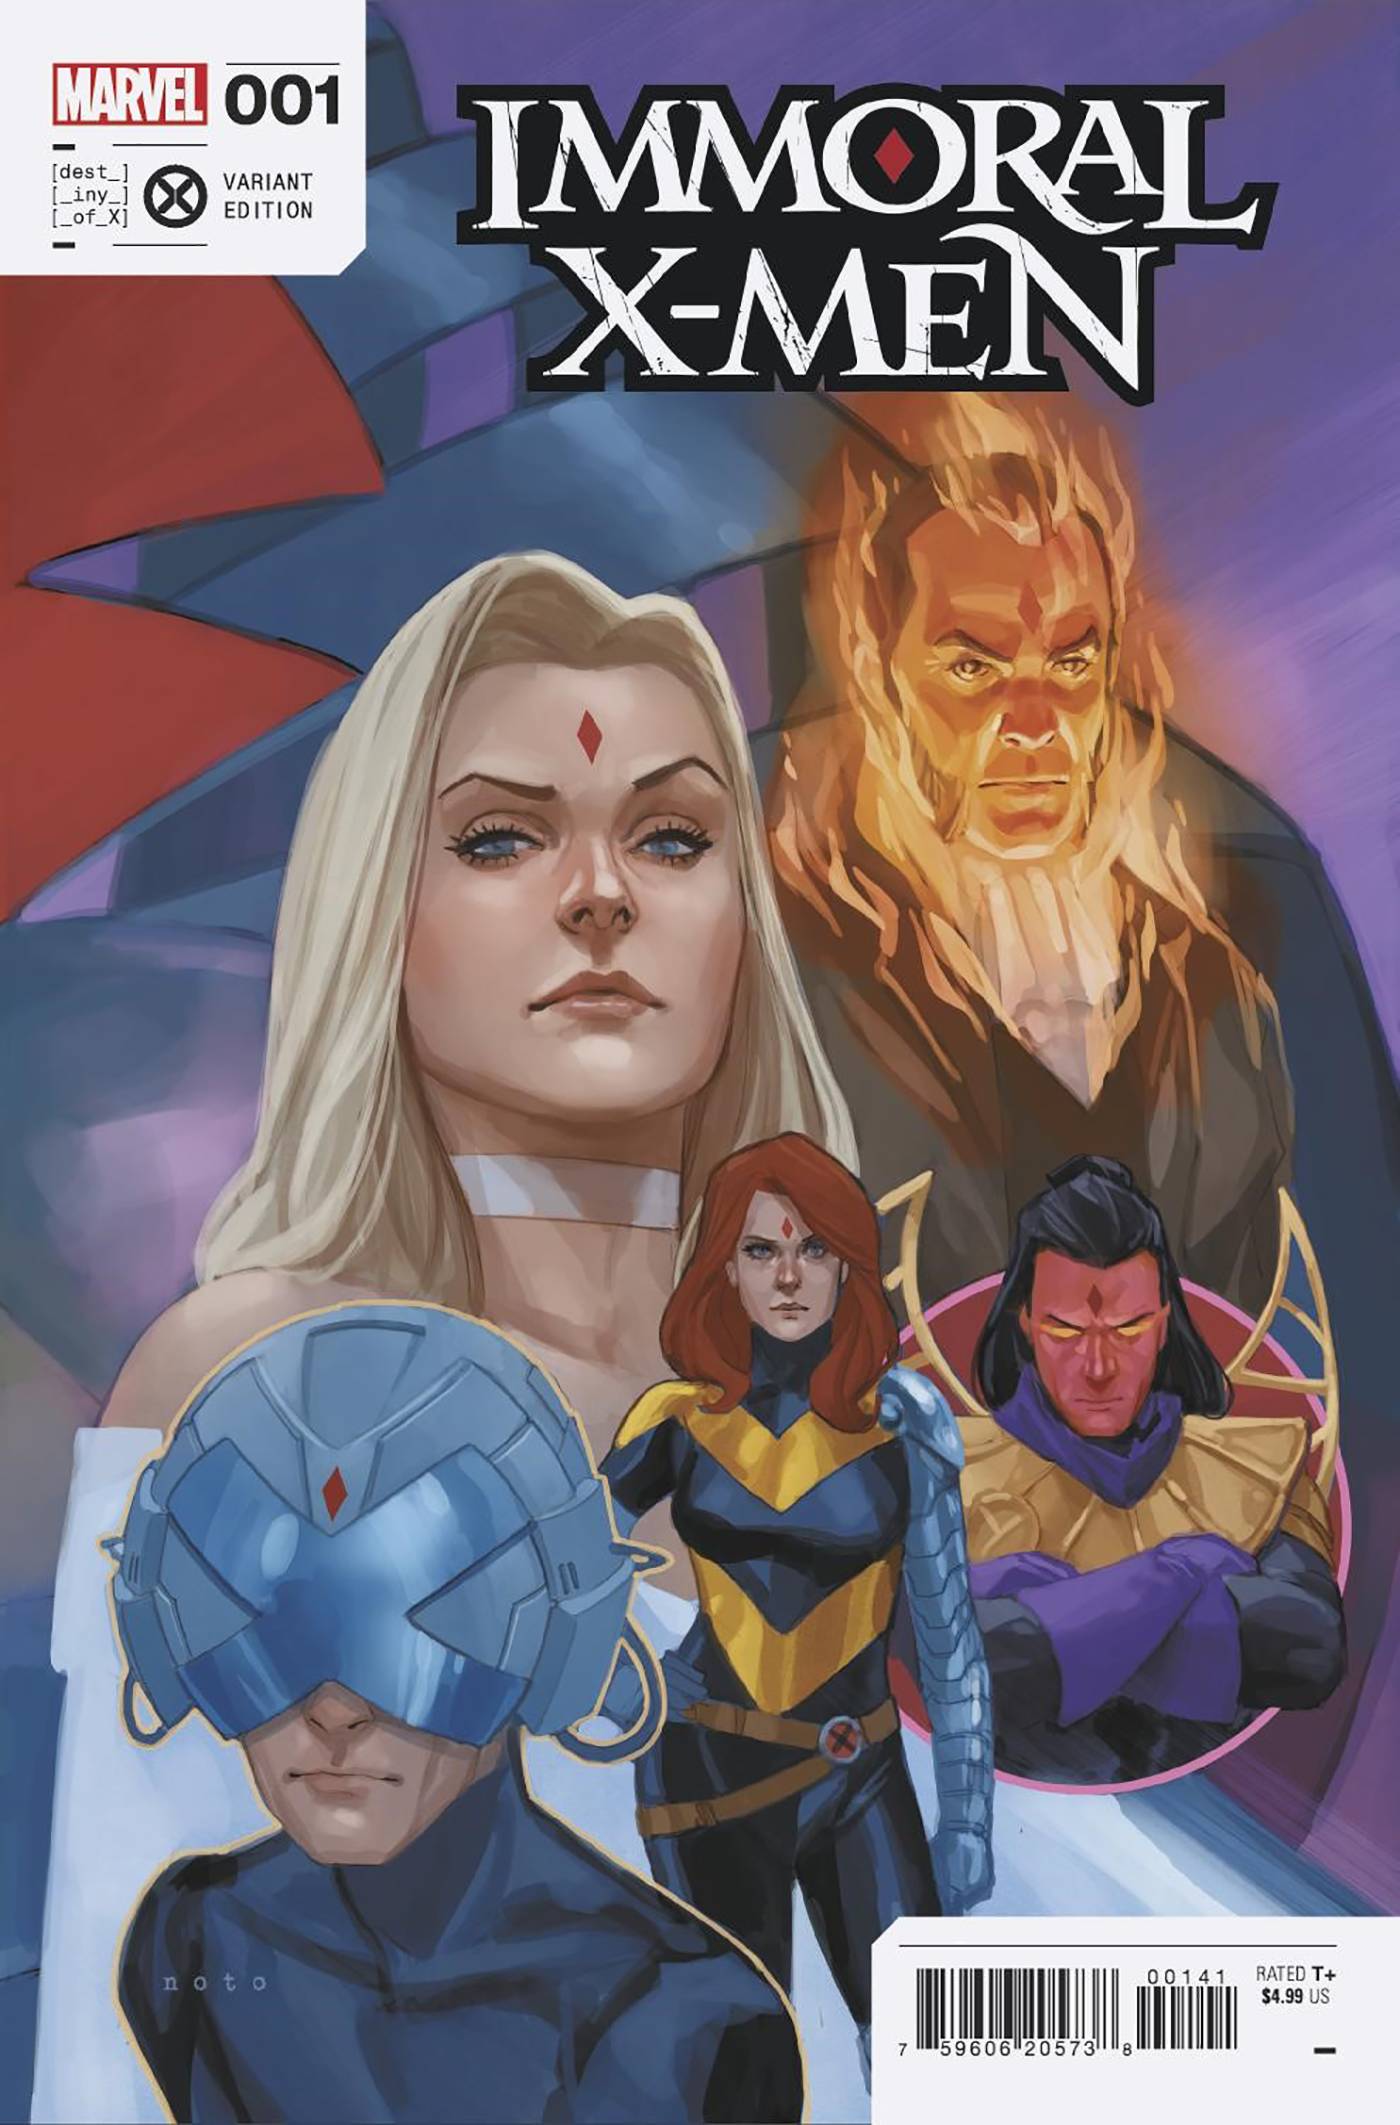 IMMORAL X-MEN #1 (OF 3) NOTO SOS FEBRUARY CONNECTING VAR